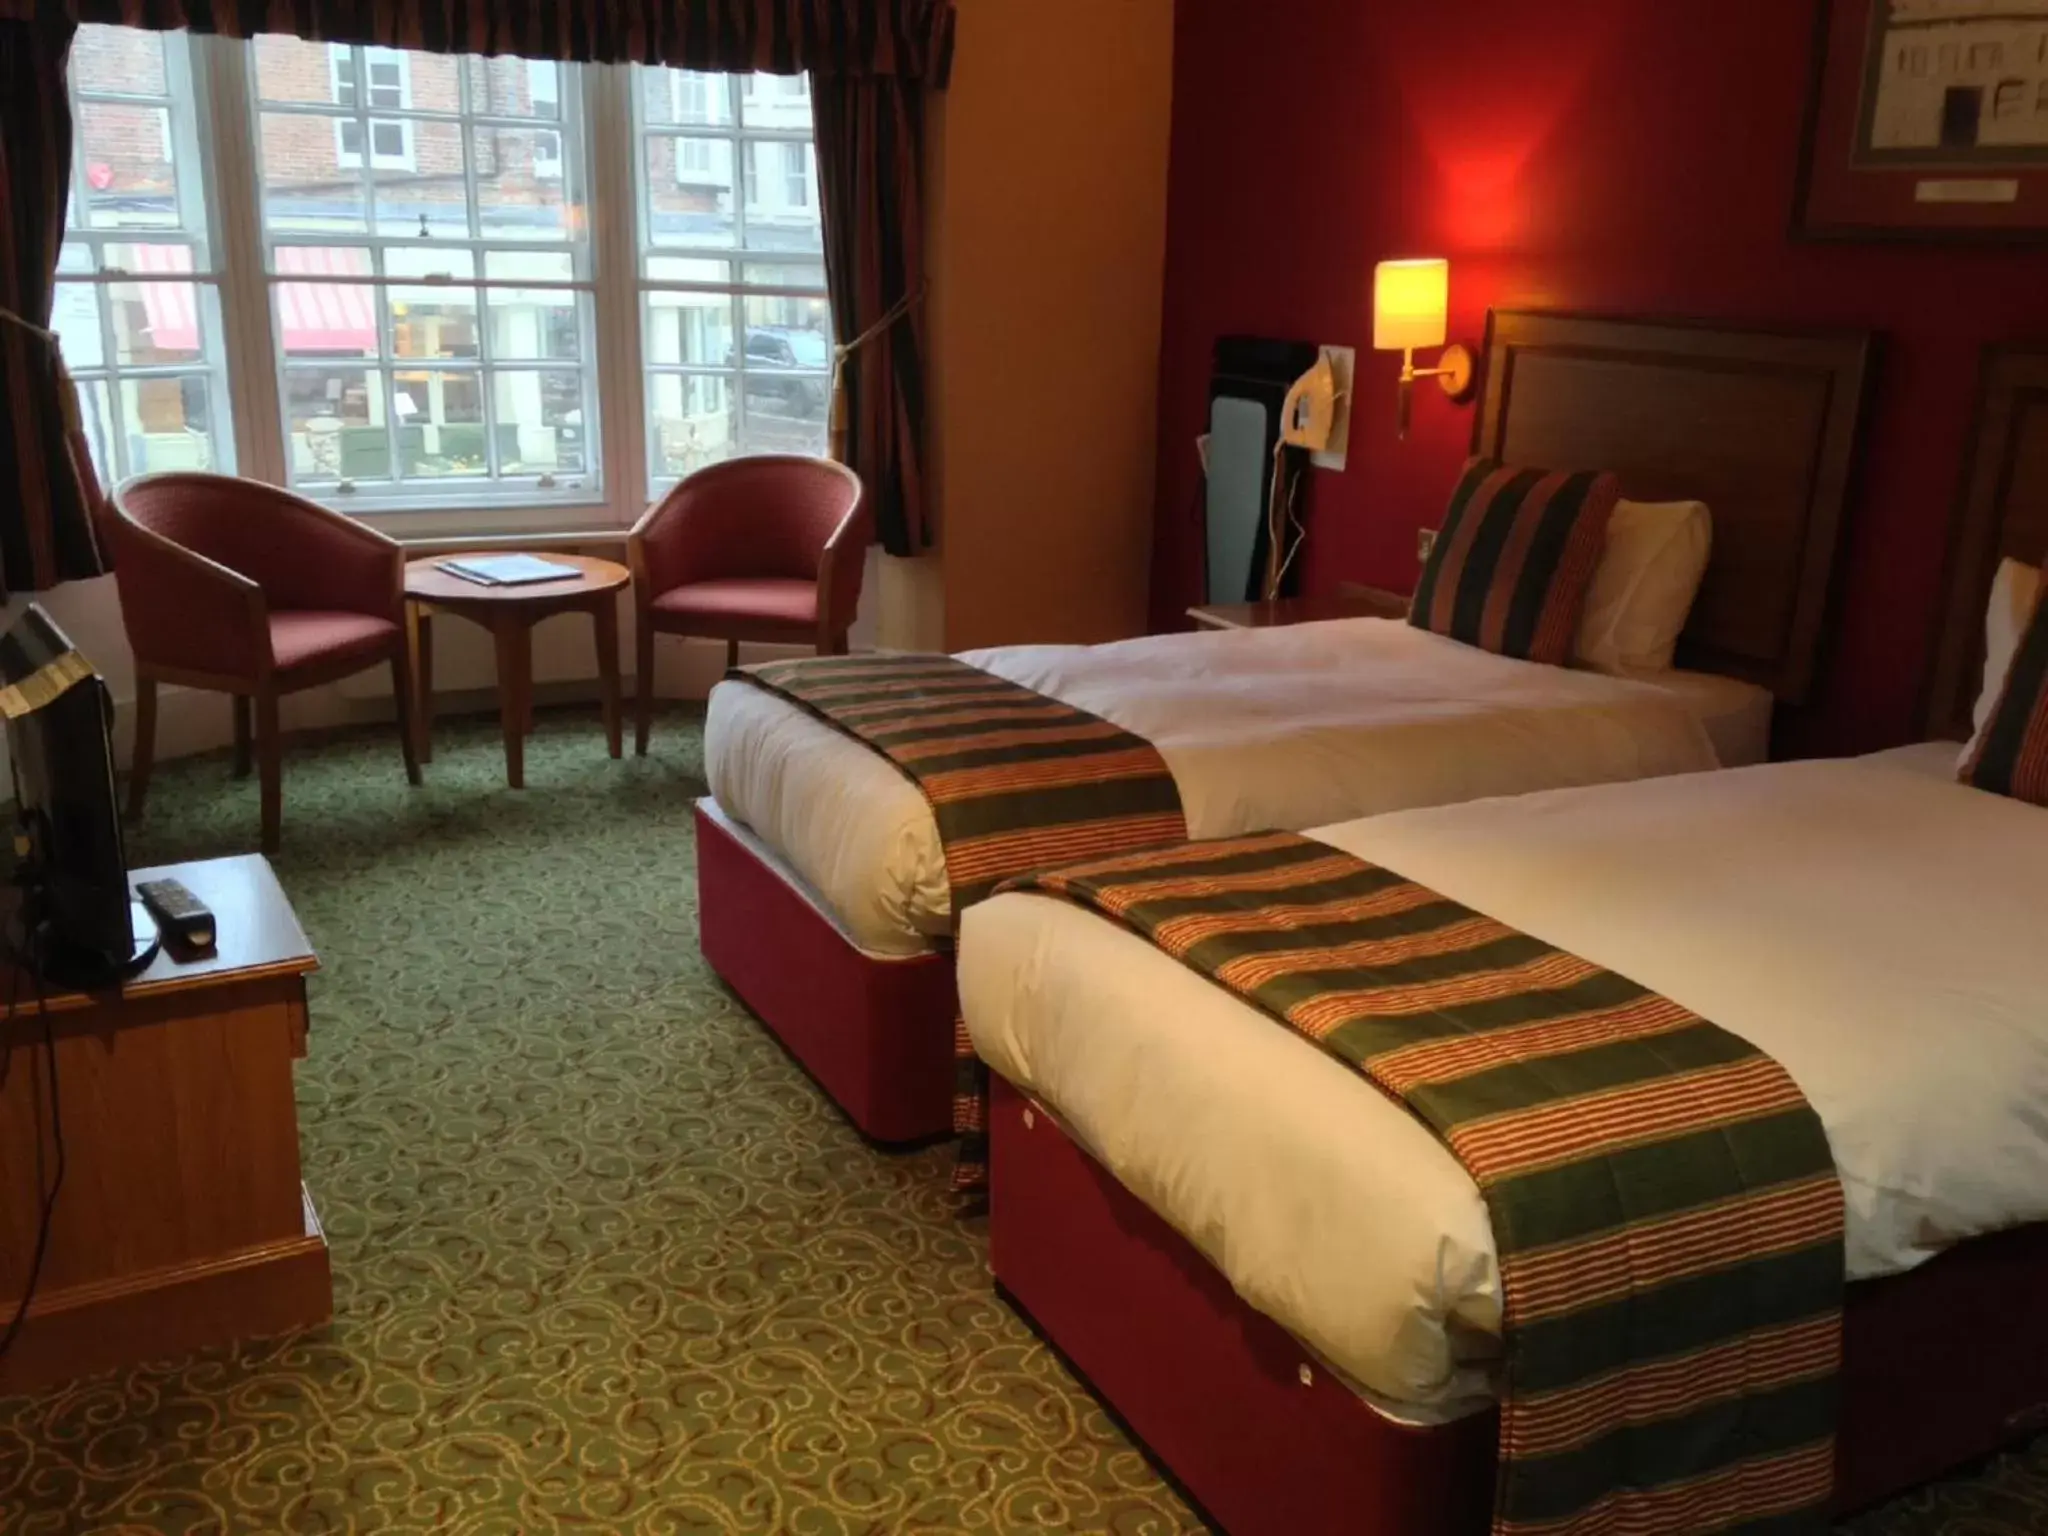 Bed, Room Photo in The Catherine Wheel Wetherspoon Hotel